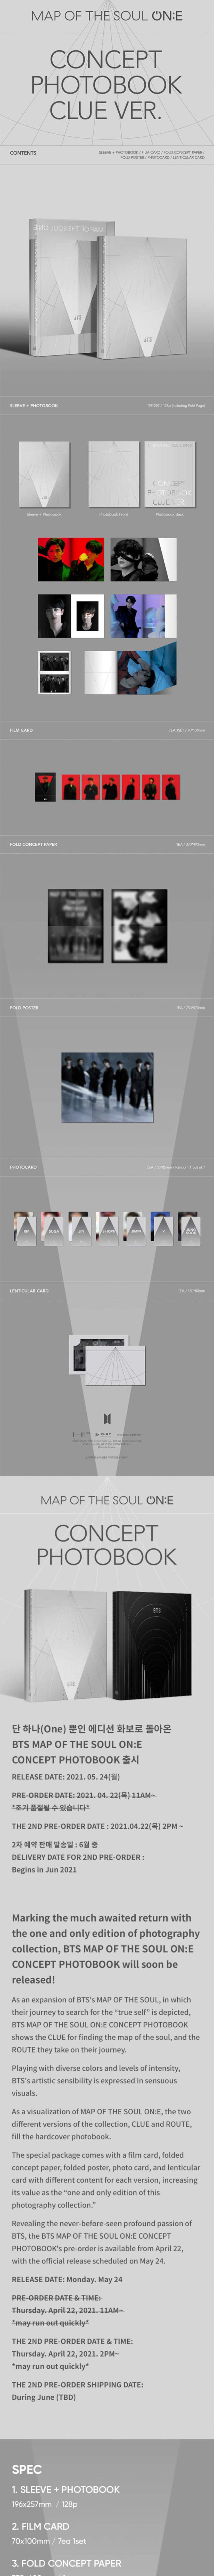 map-of-the-soul-on-e-concepts-photobook-clue-ver-wholesale